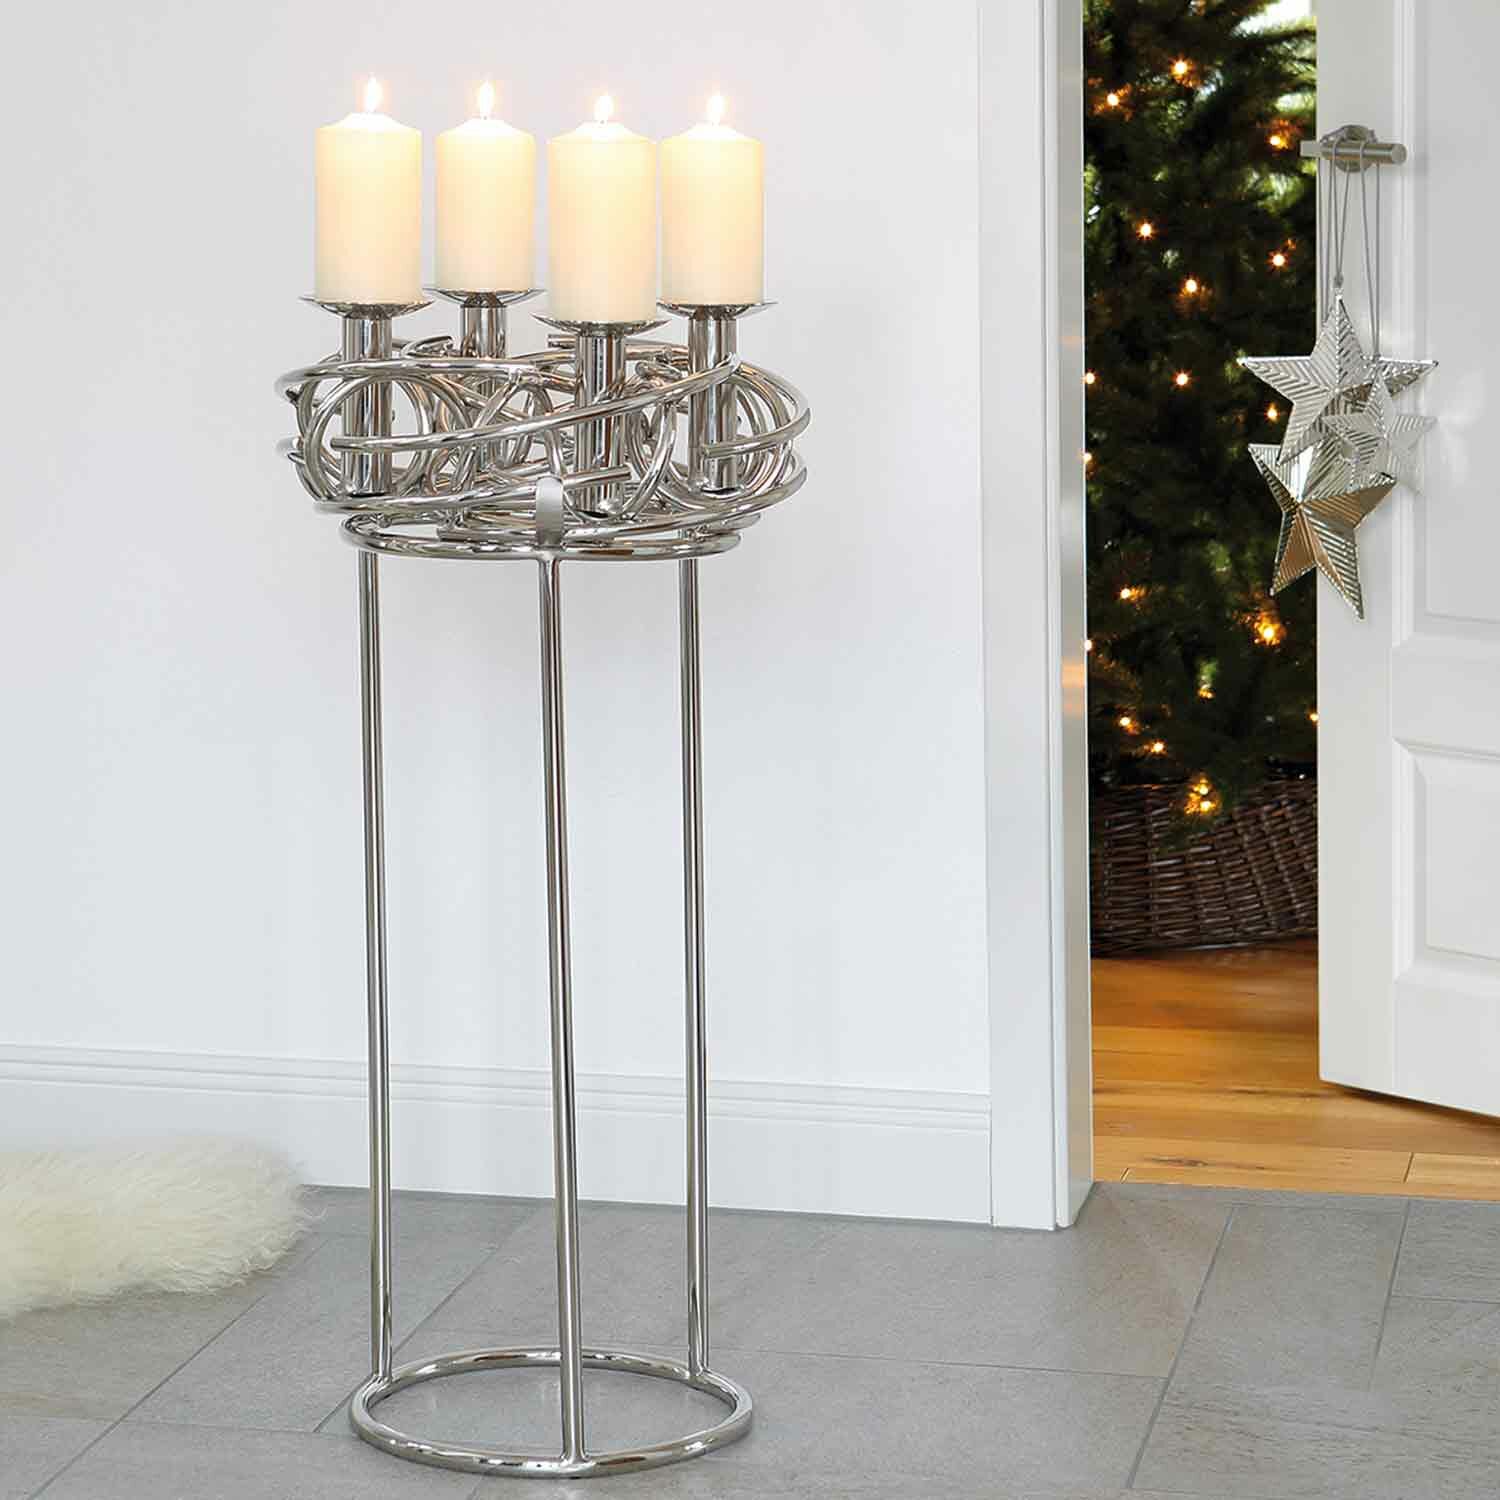 CORONA stand for candlestick wreath 40 cm